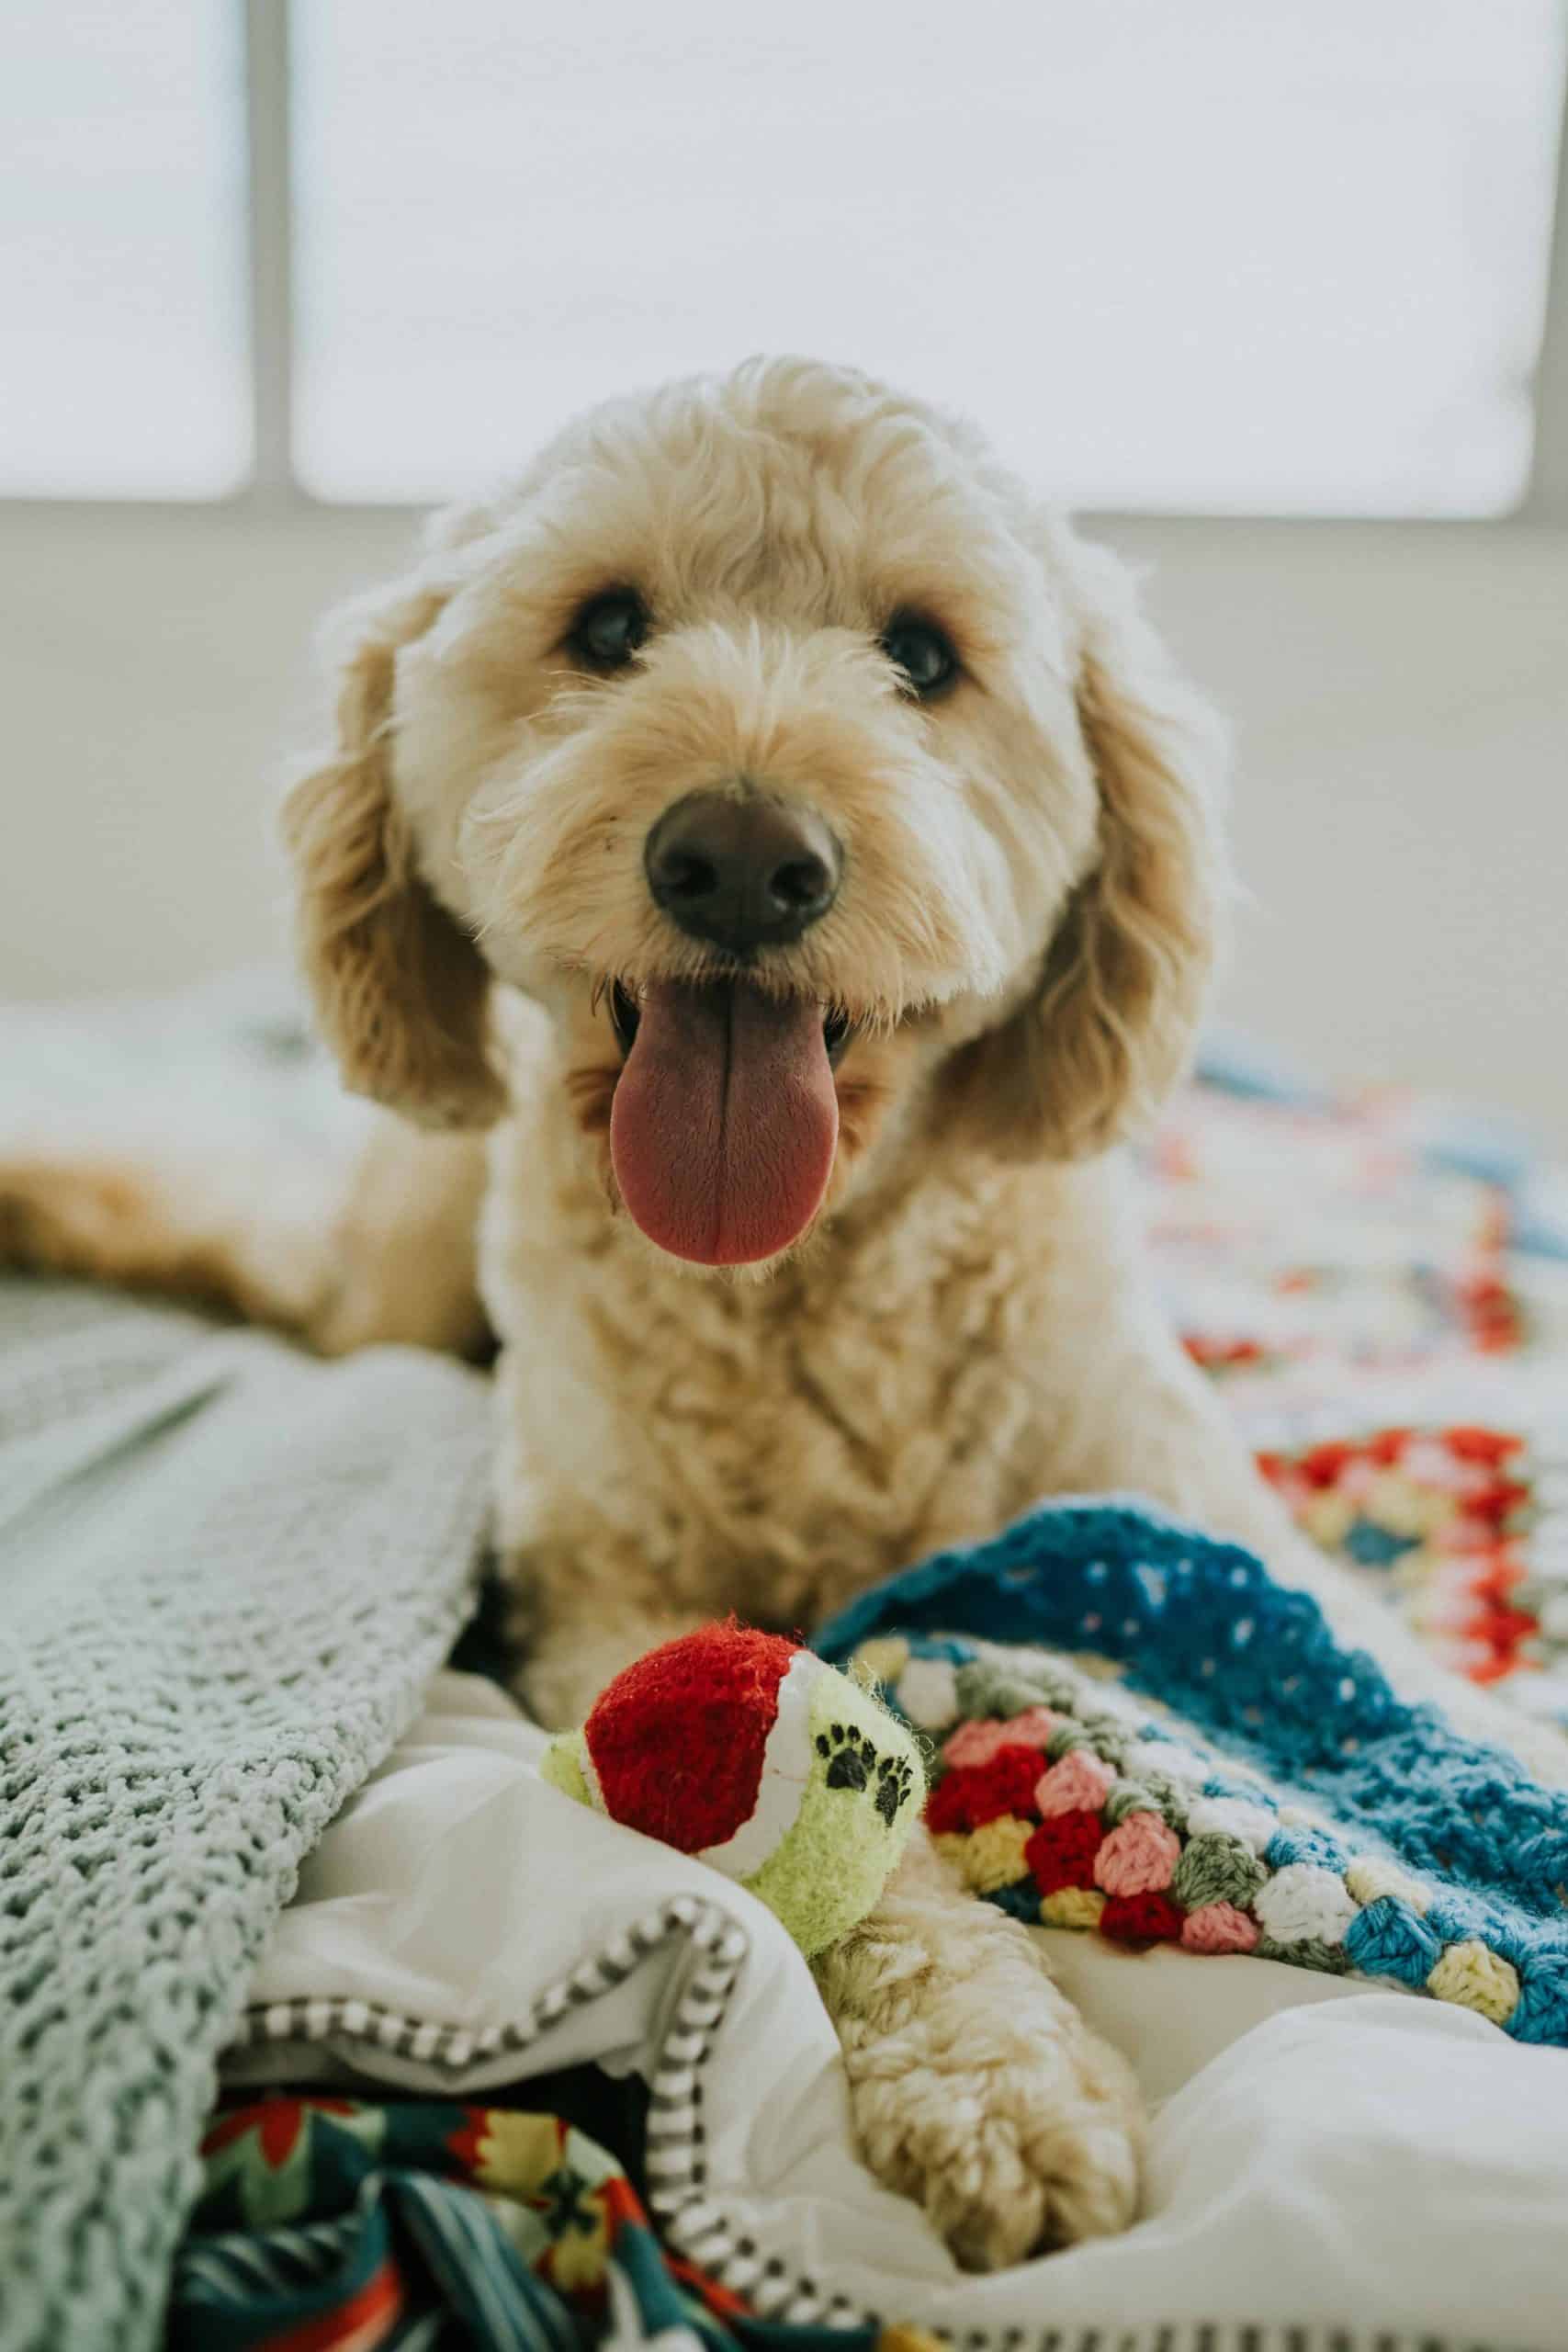 How much money do you spend on your pet each month? When you are paying off debt, saving every penny is very important. Check out this post to find out how I saved $100 on pet expenses this month!